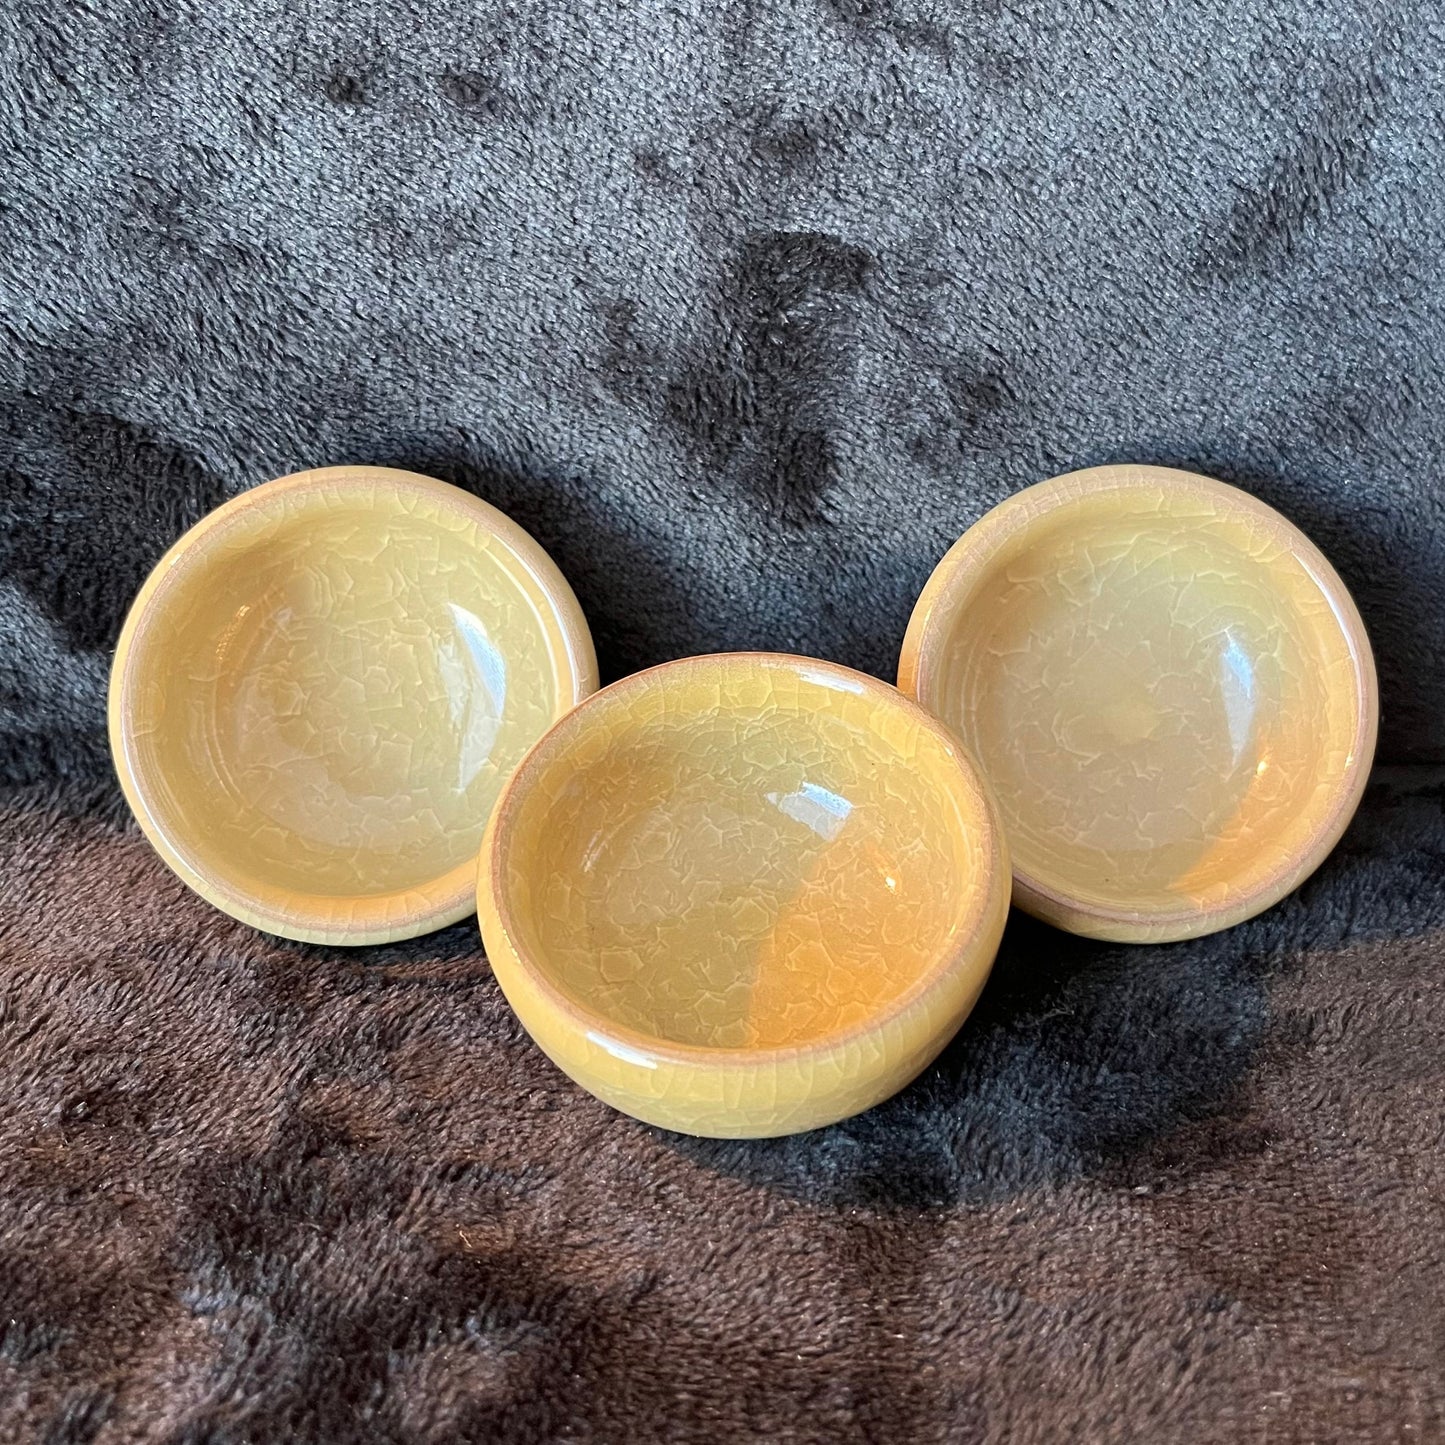 Small Ceramic Bowl, Golden Yellow (Approx. 2 5/8" x 1 1/4") 1606